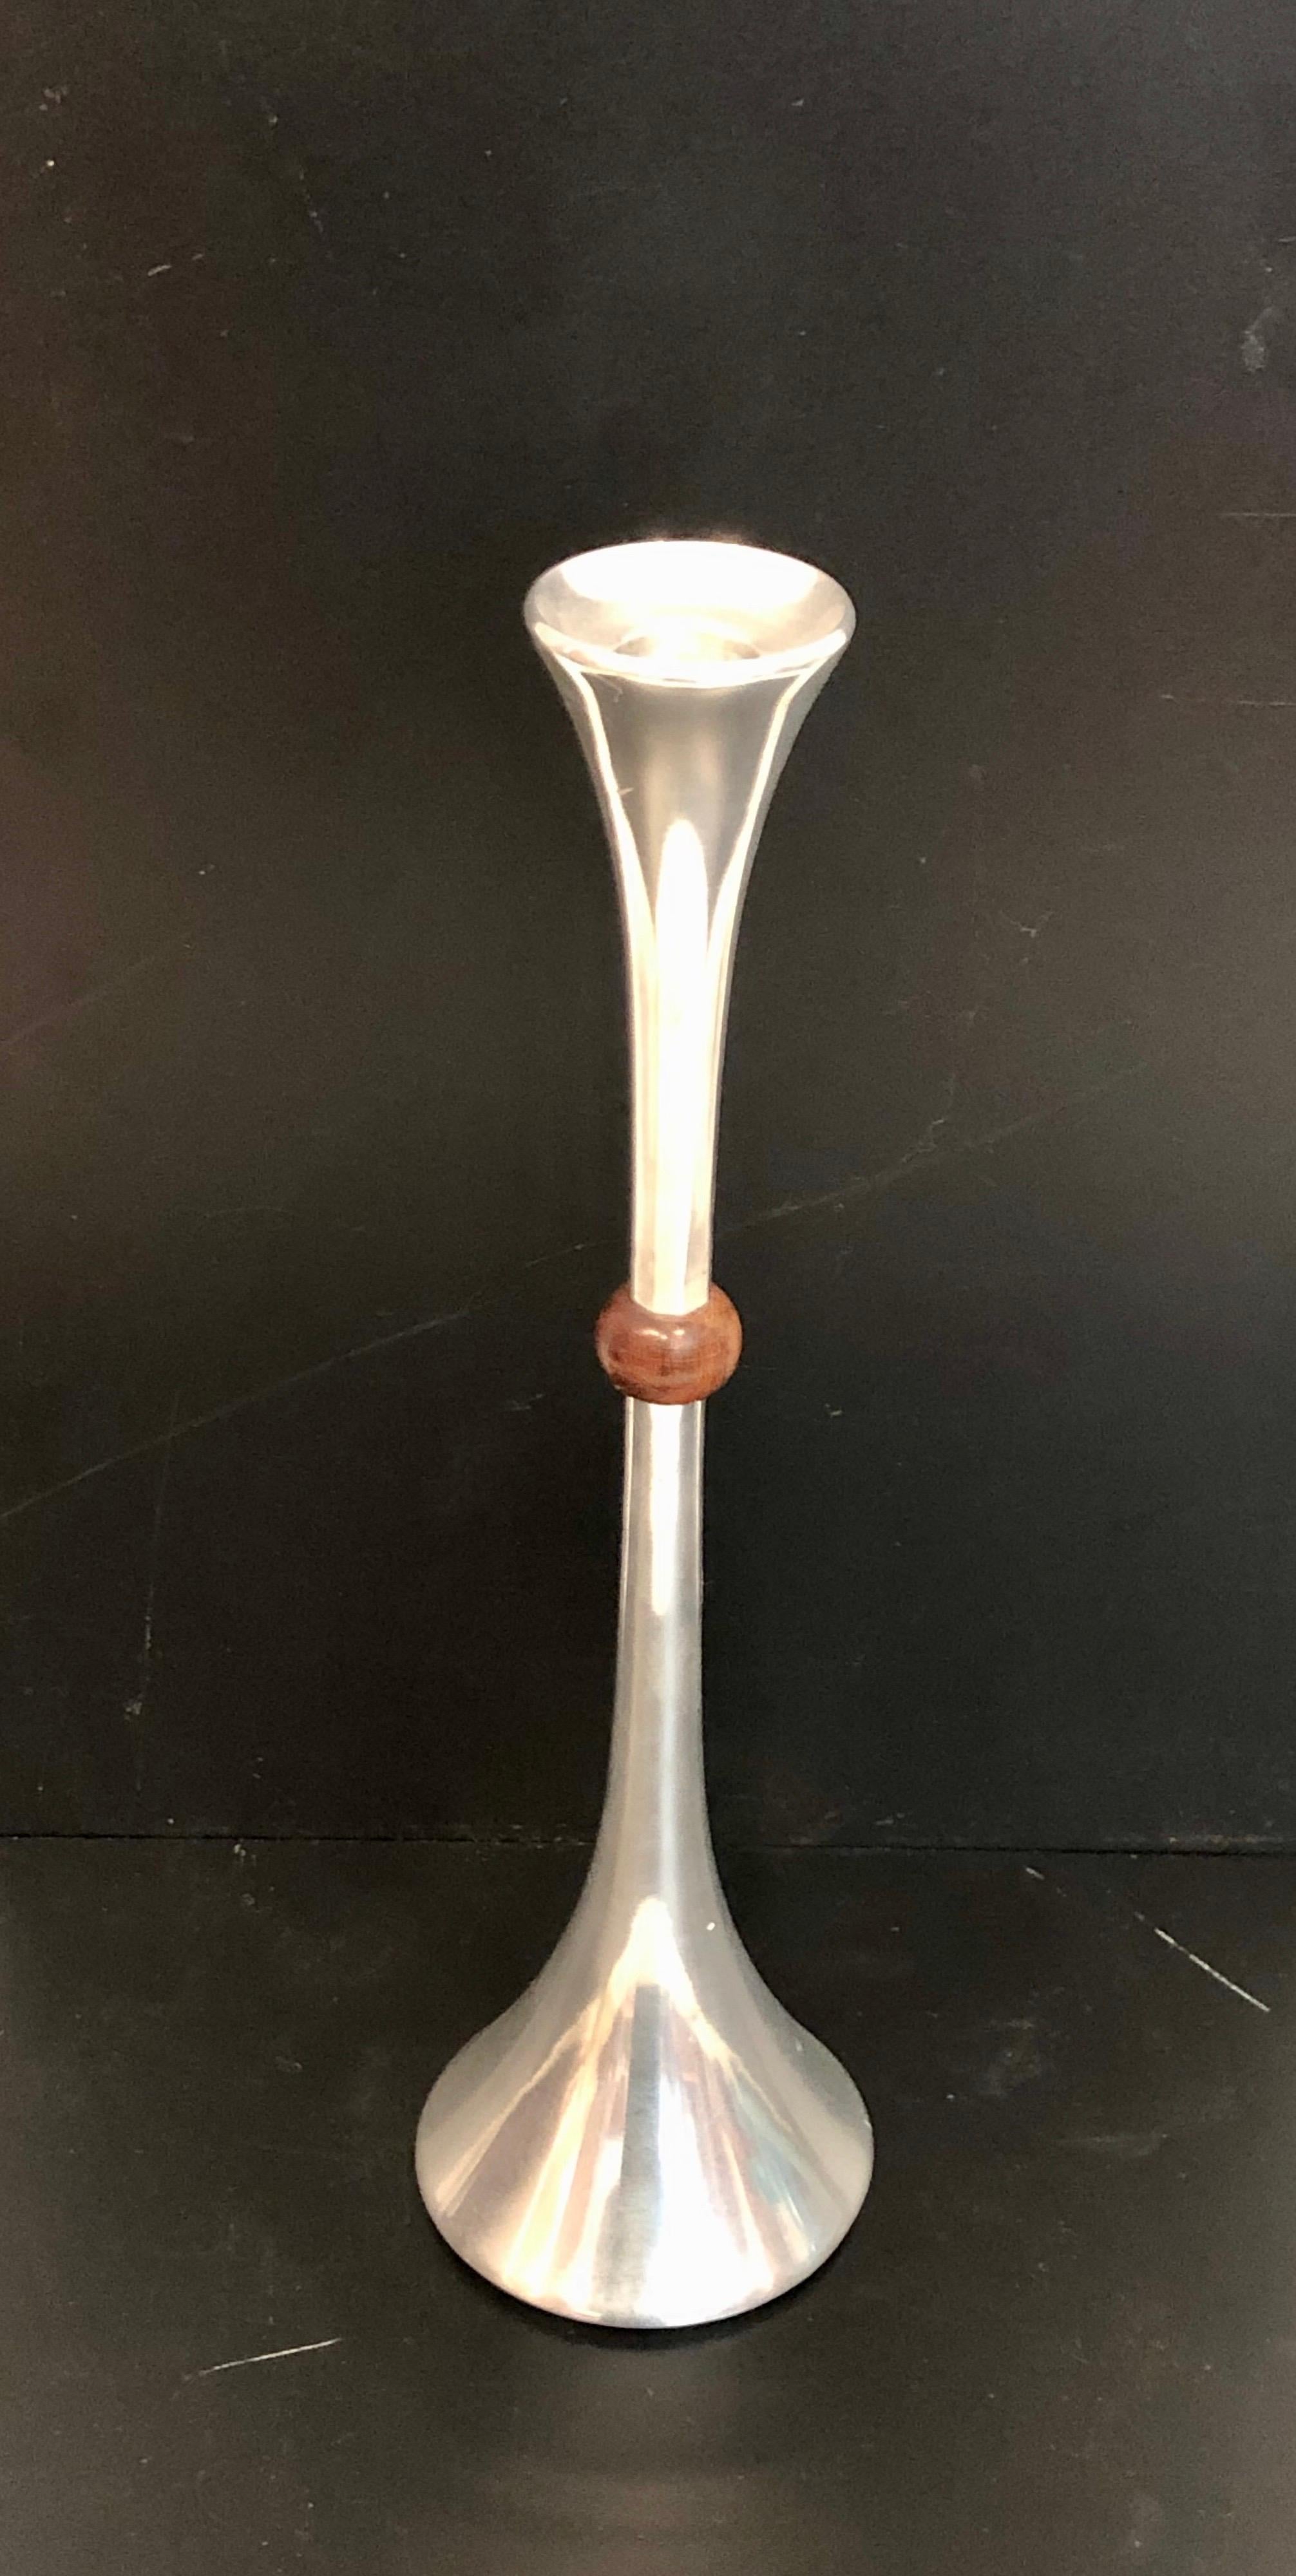 Great design on this tall trumpet shape polished aluminum with solid walnut decorative center, designed by Quistgaard for Dansk.